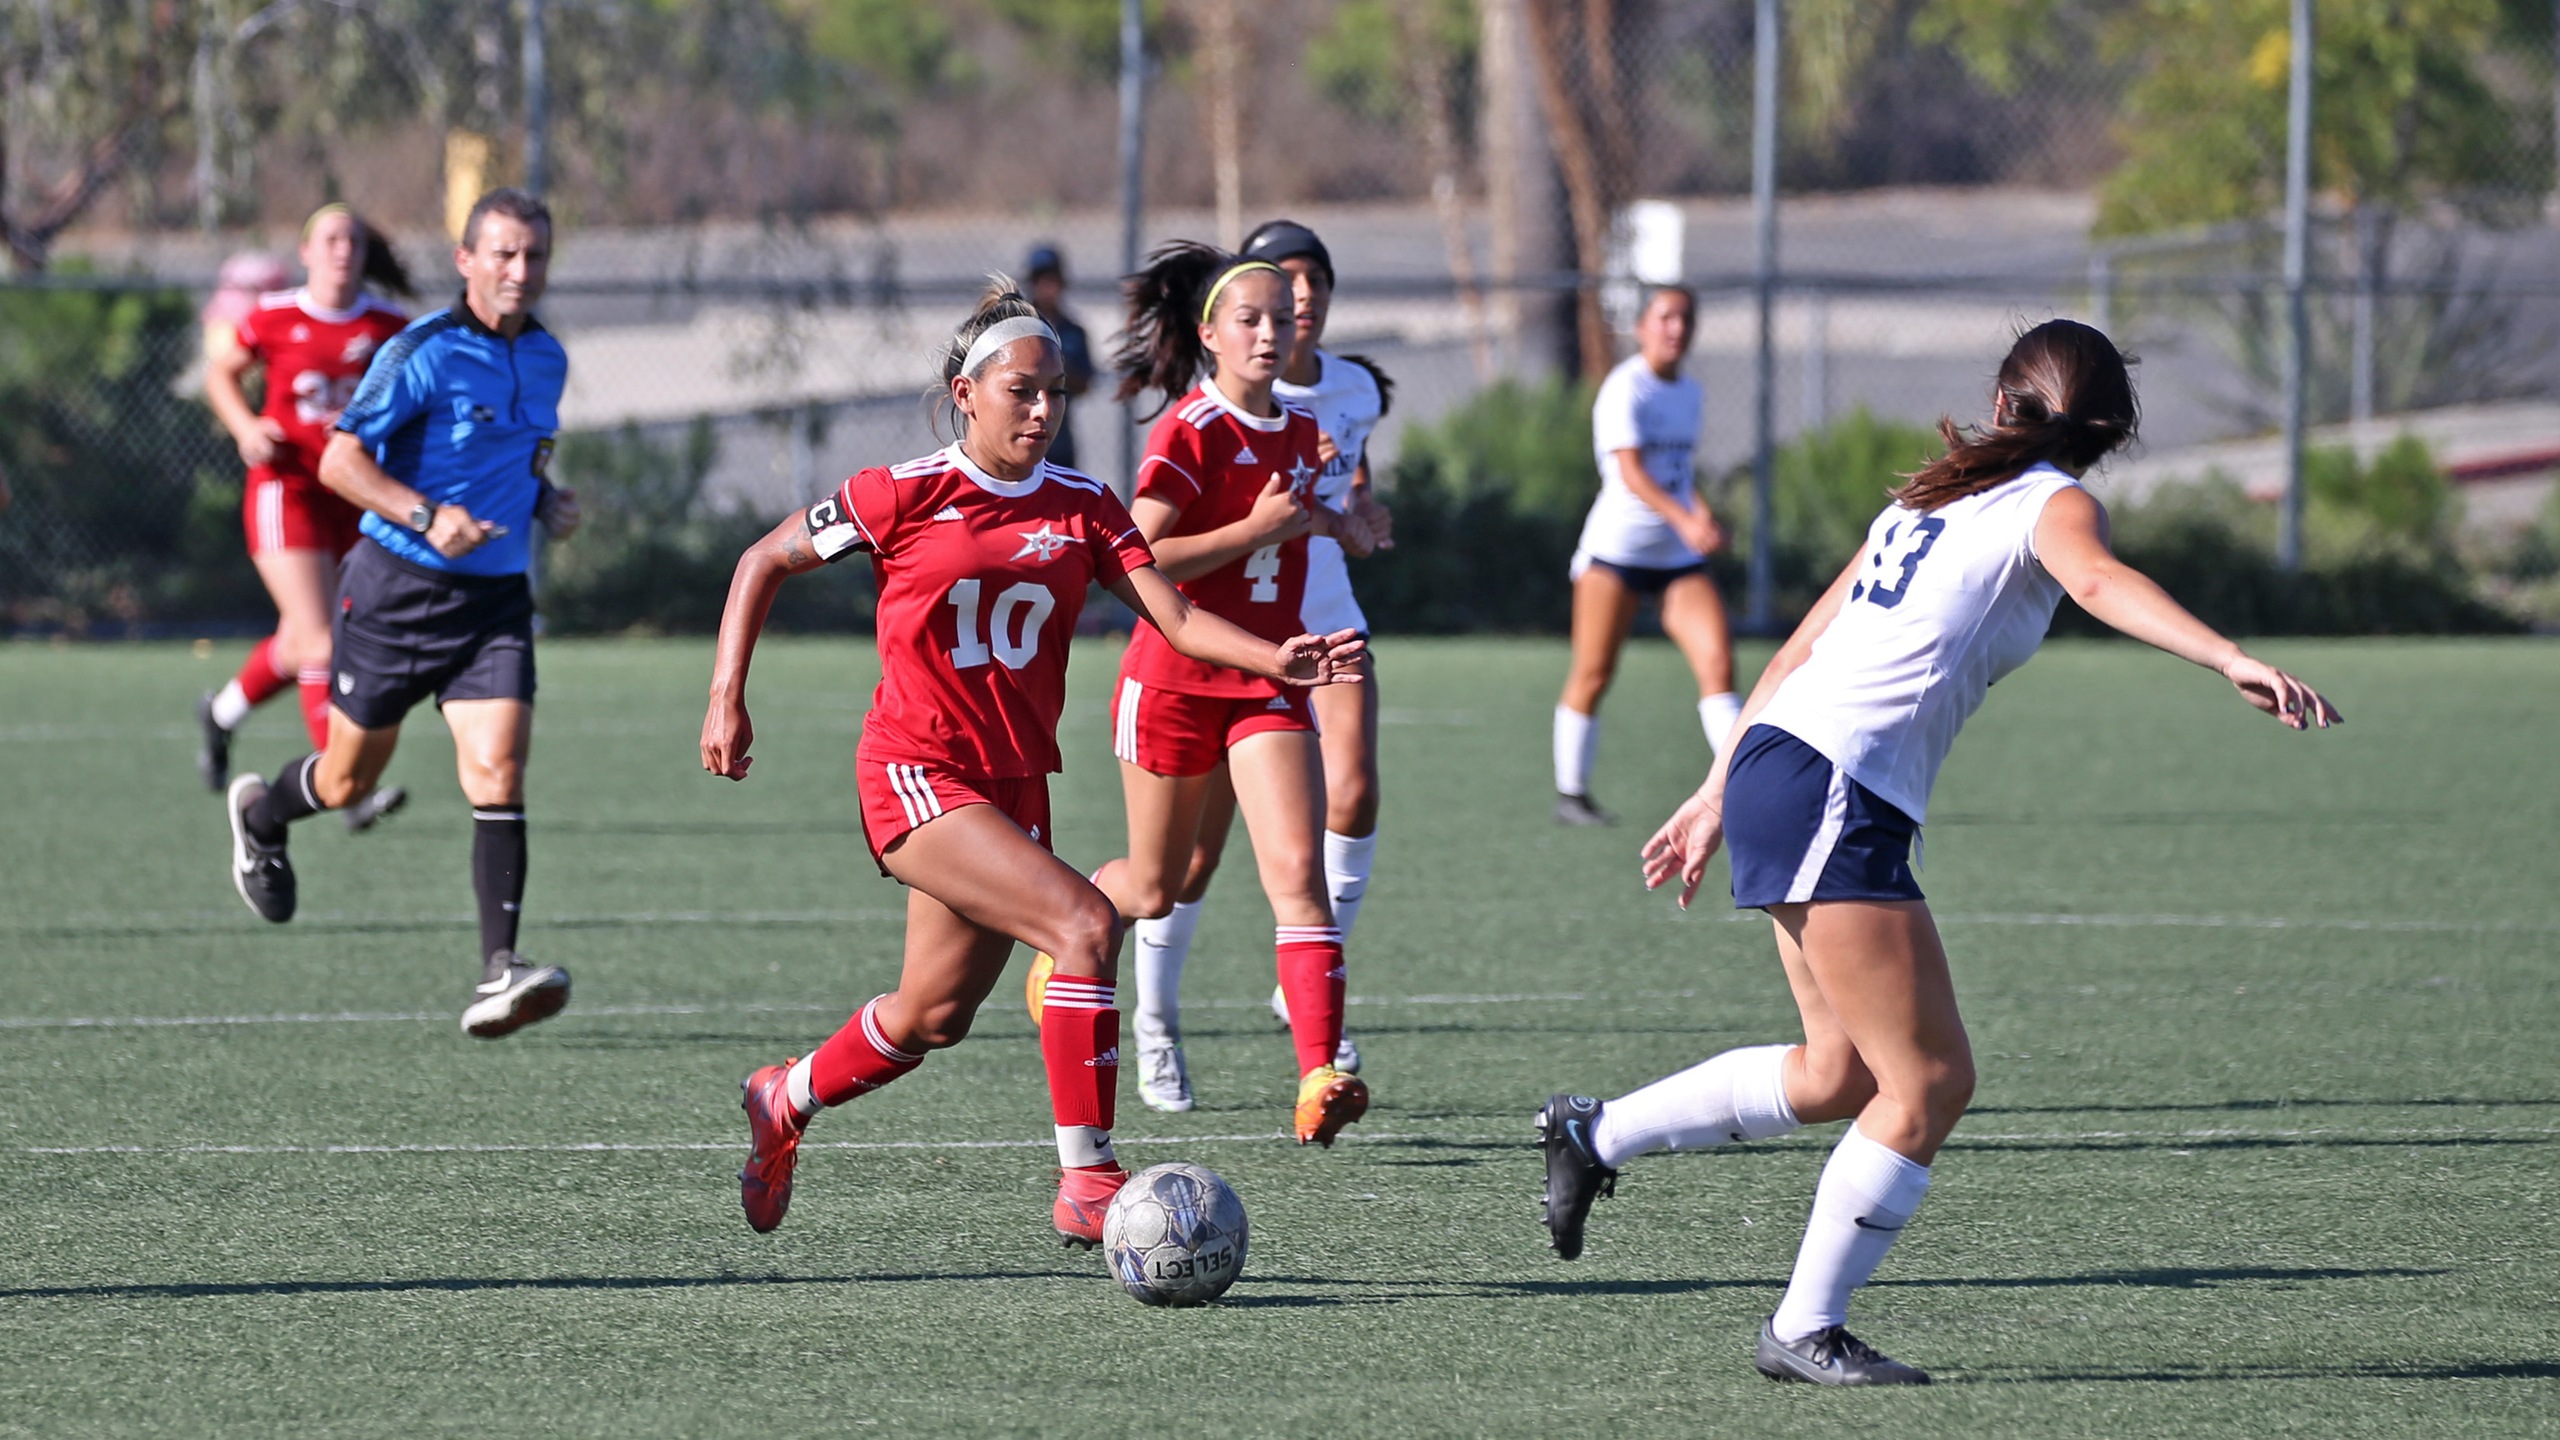 Judith Belman scored two goals for the Comets against Grossmont. Photo by Hugh Cox.